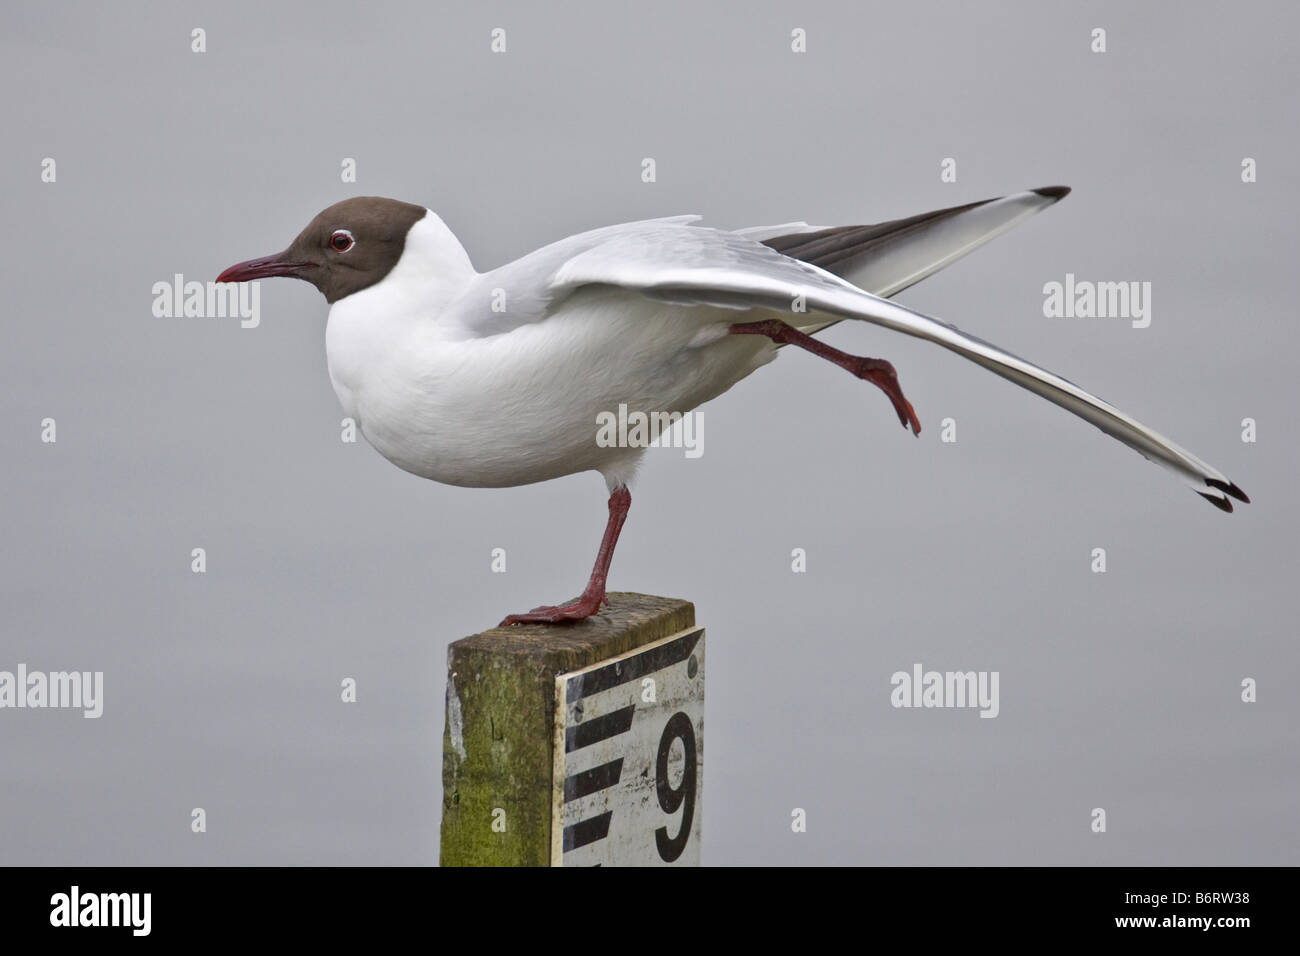 An adult Black-headed Gull (Larus ridibundus) stretches its wing while perched on a water level post, Lancashire, England, UK Stock Photo